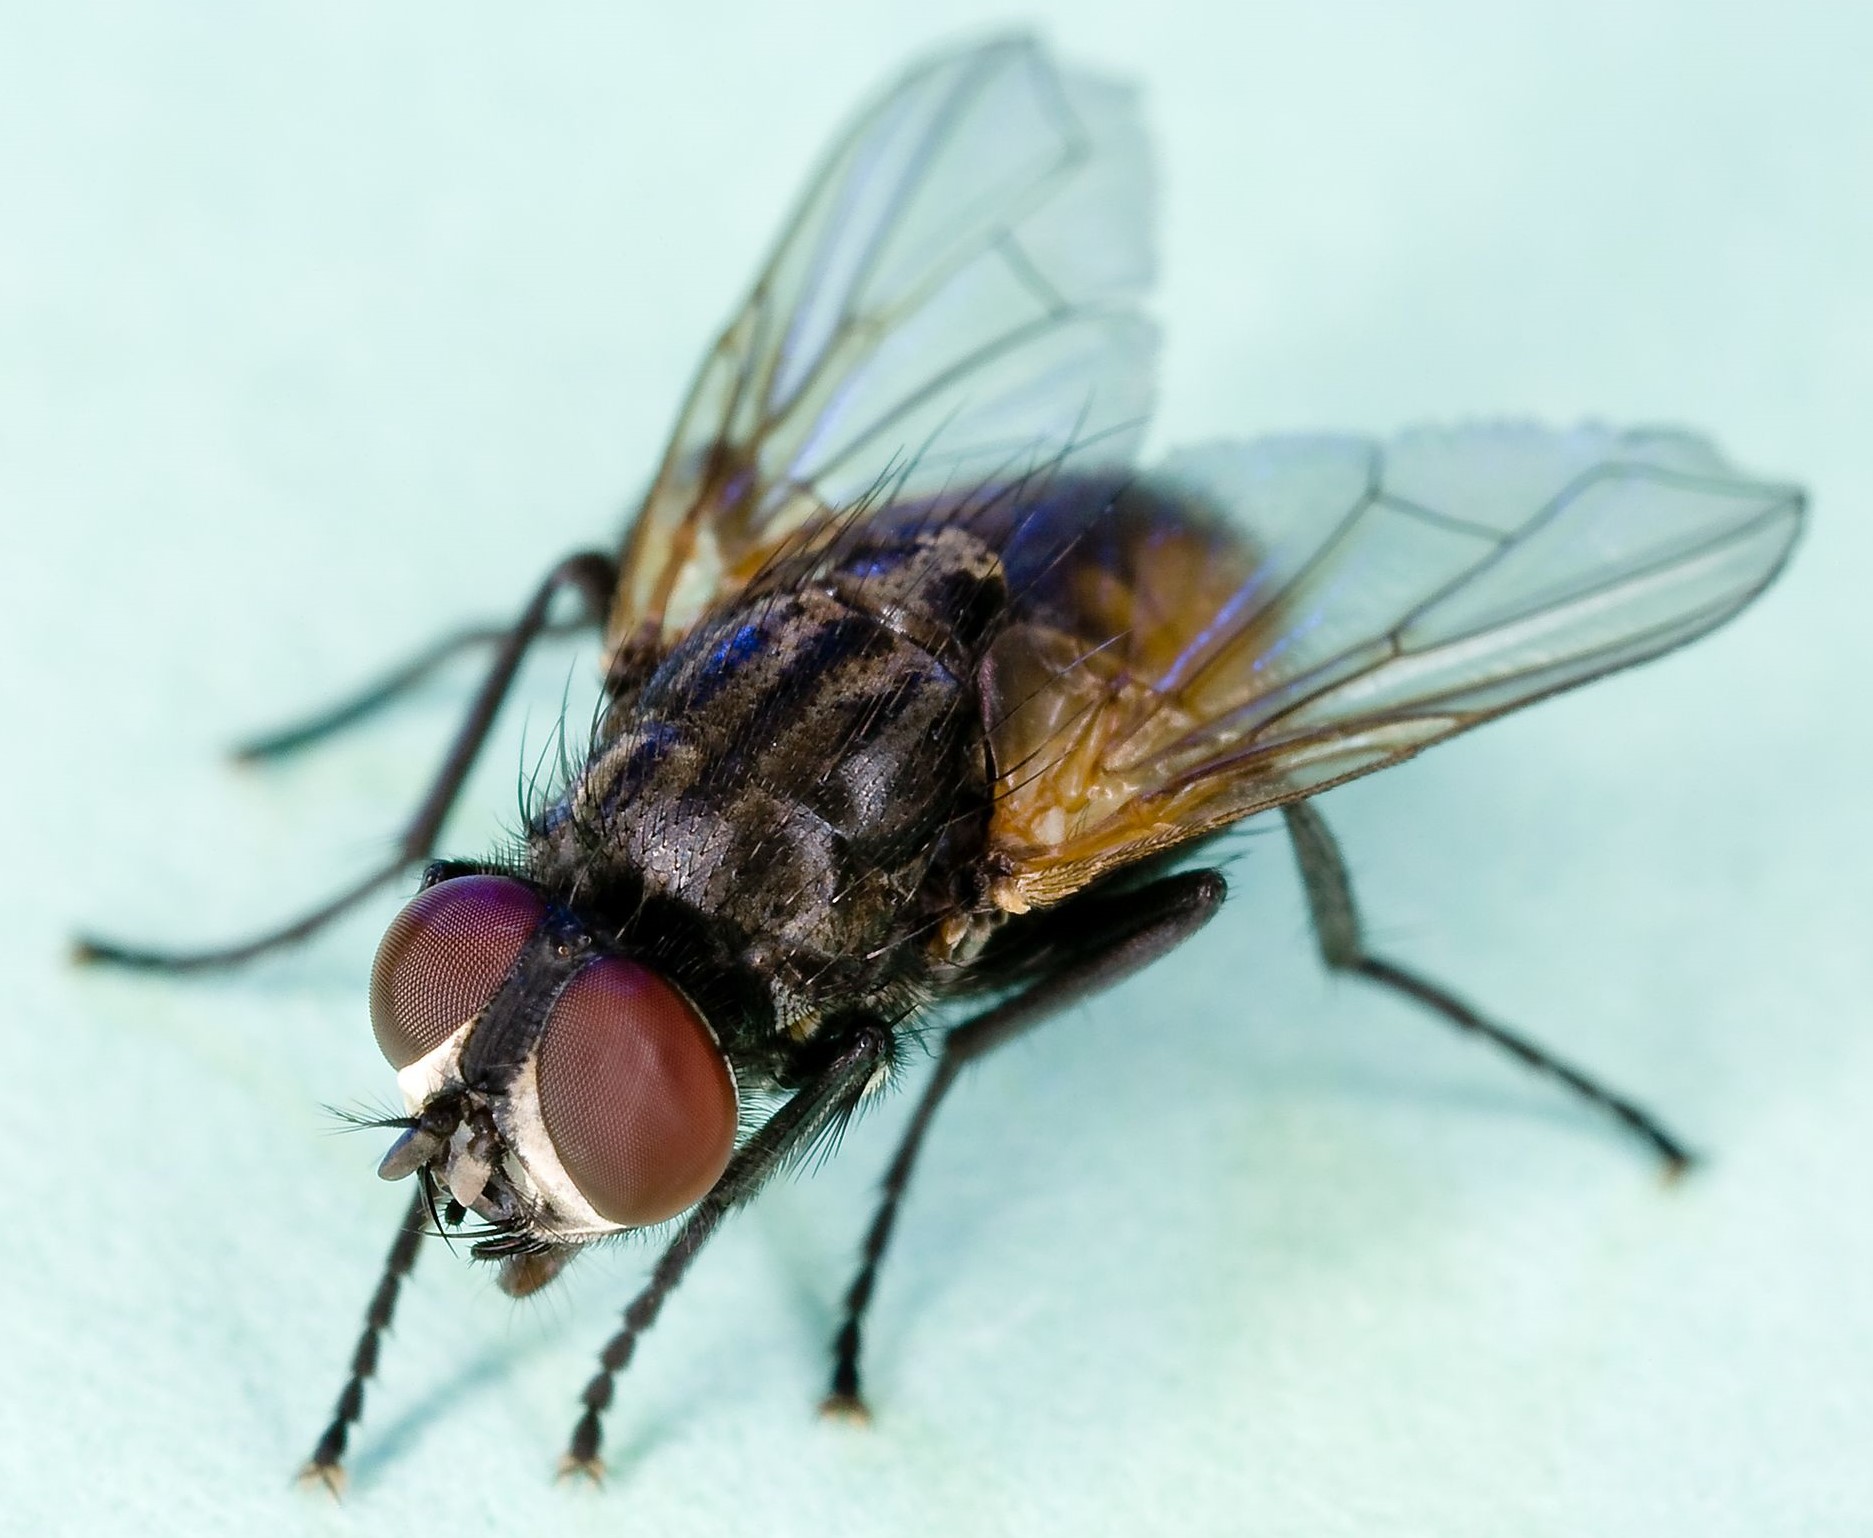 Common_house_fly,_Musca_domestica.jpg